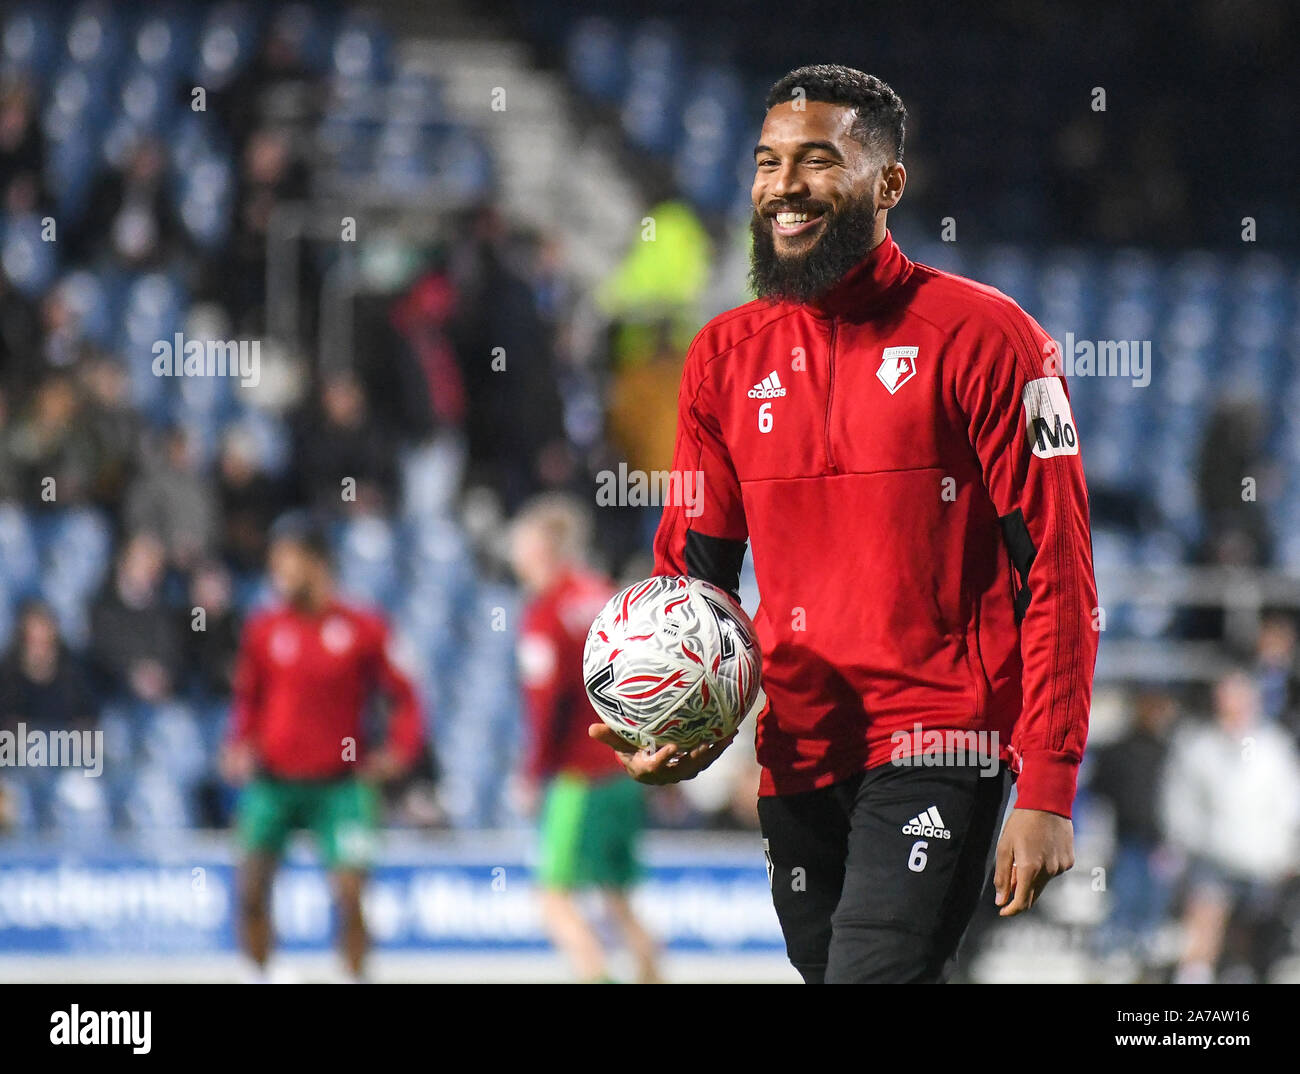 LONDON, ENGLAND - FEBRUARY 15, 2019: Adrian Mariappa of Watford pictured prior to the 2018/19 FA Cup Fifth Round game between Queens Park Rangers FC and Watford FC at Loftus Road Stadium. Stock Photo